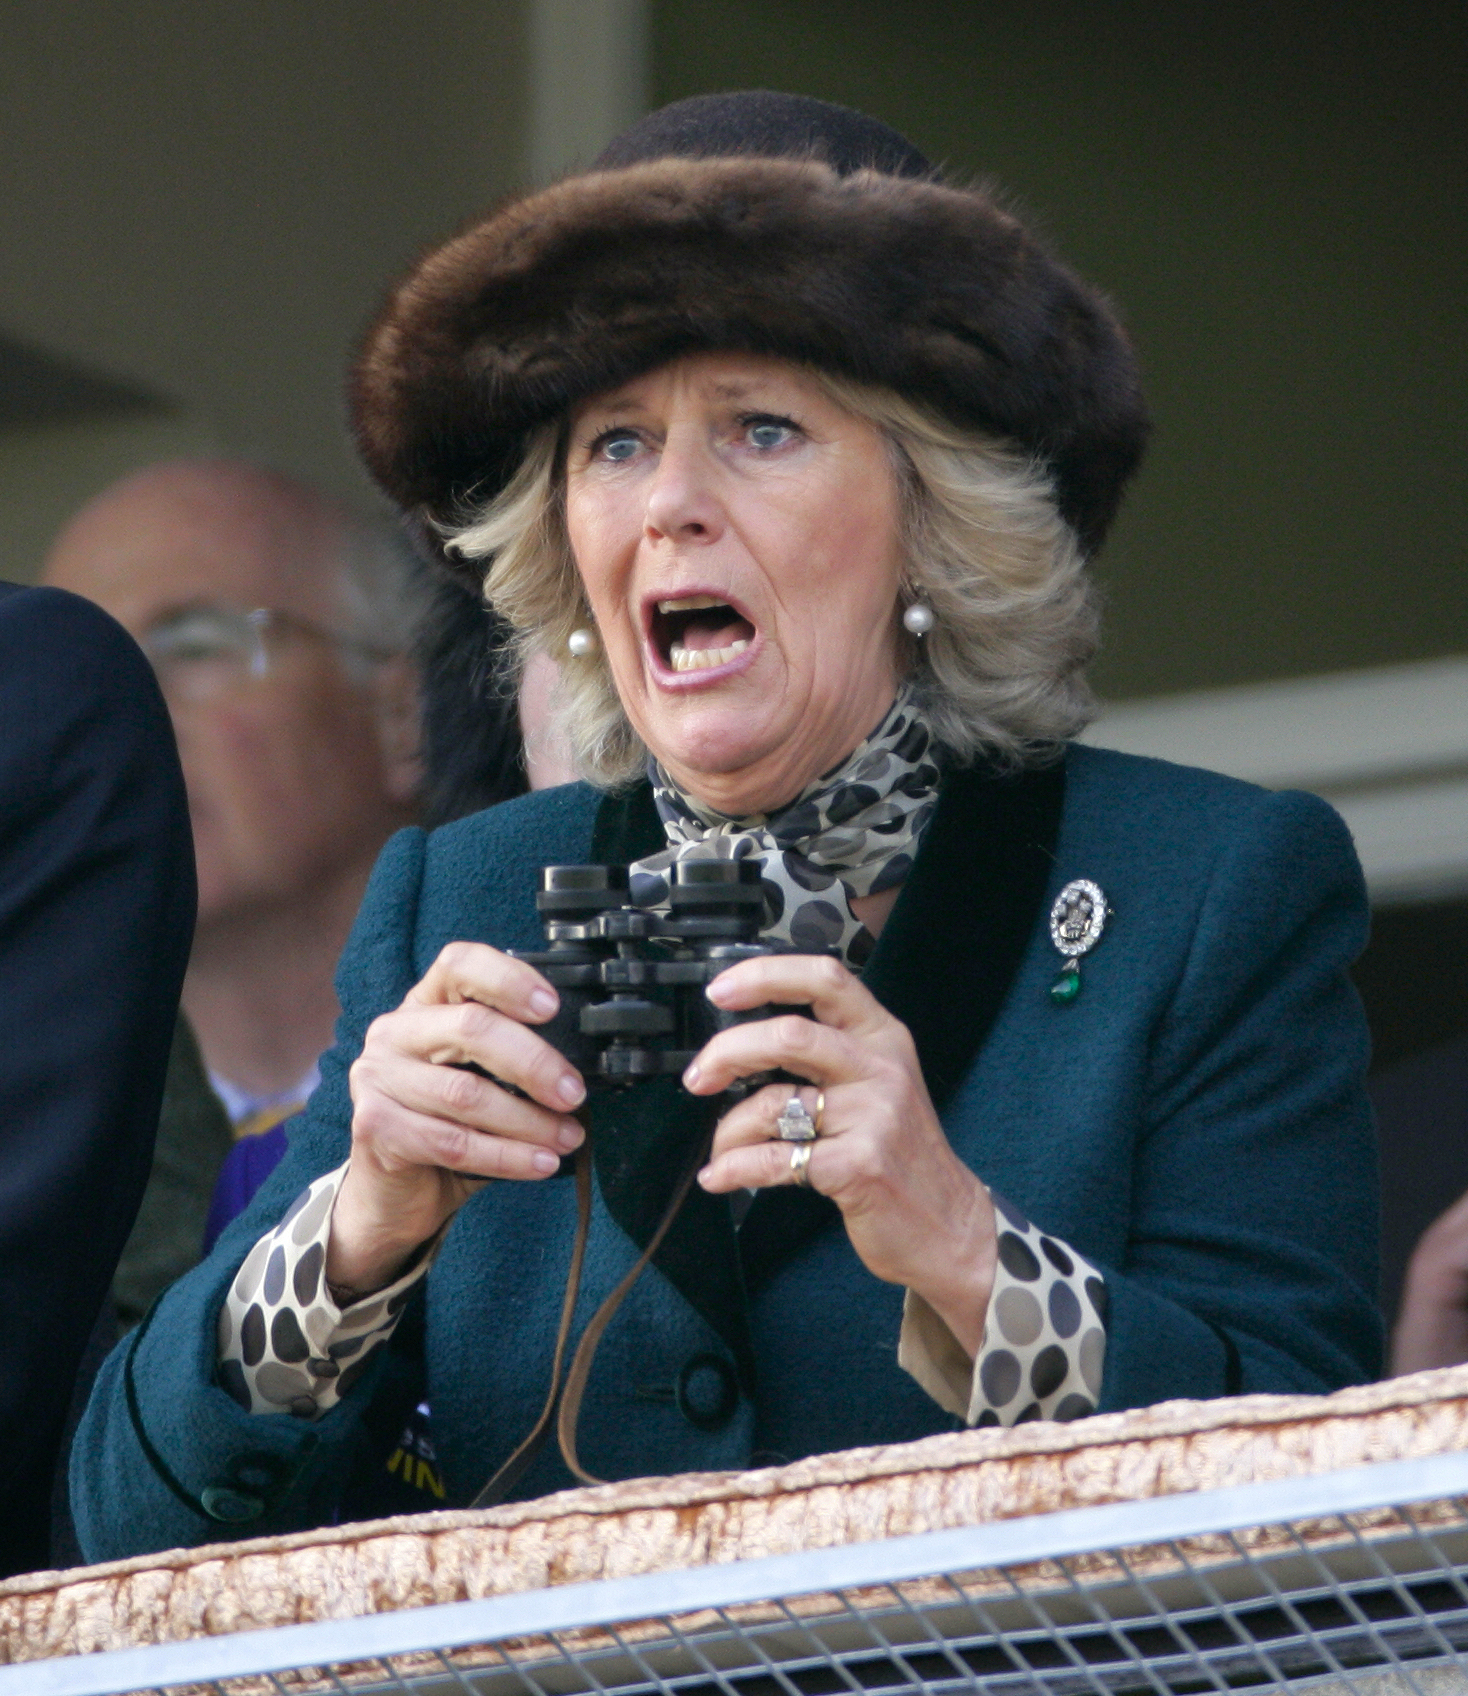 Camilla, Duchess of Cornwall watches the "Queen Mother Champion Steeple Chase" horse race at the Cheltenham Horse Racing Festival on March 14, 2012, in Cheltenham, England | Source: Getty Images